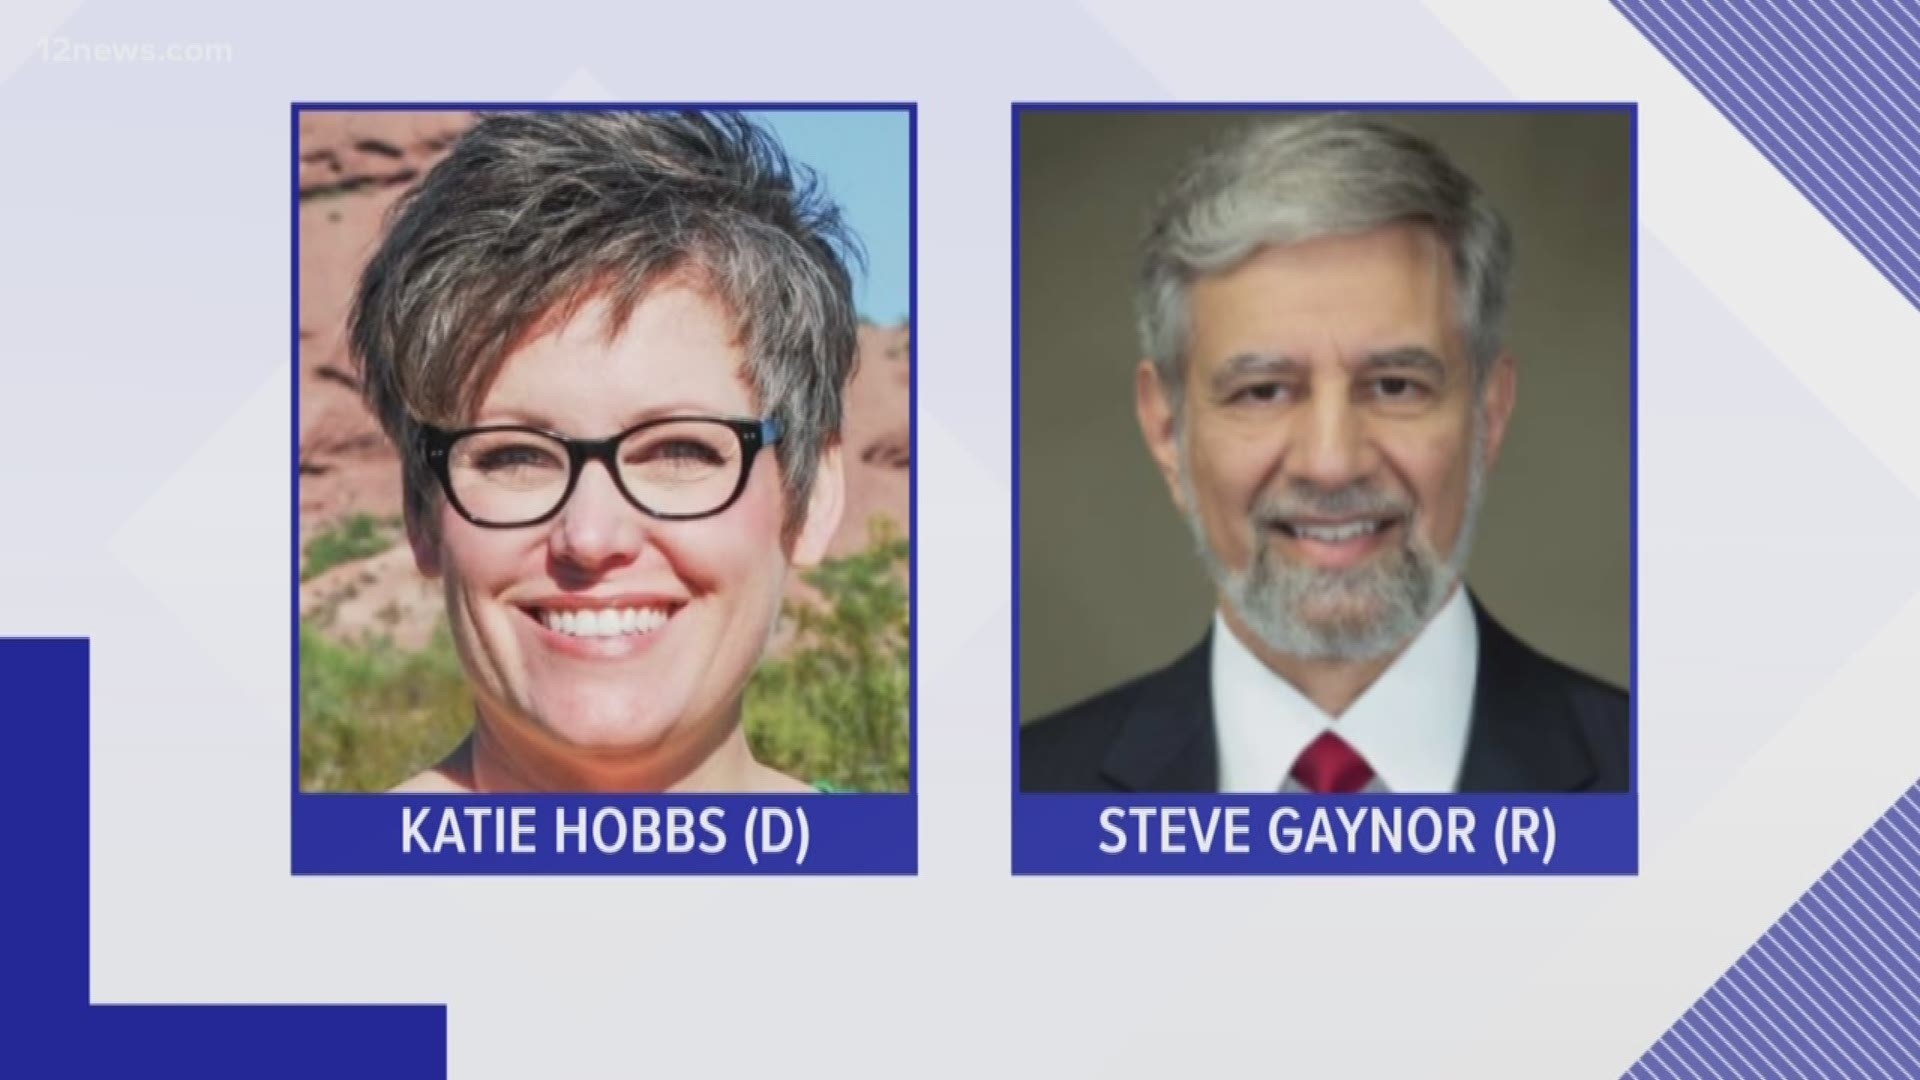 Katie Hobbs leads Steve Gaynor in the race for Secretary of State by 13,000 votes. 90,000 ballots are still left to be counted.